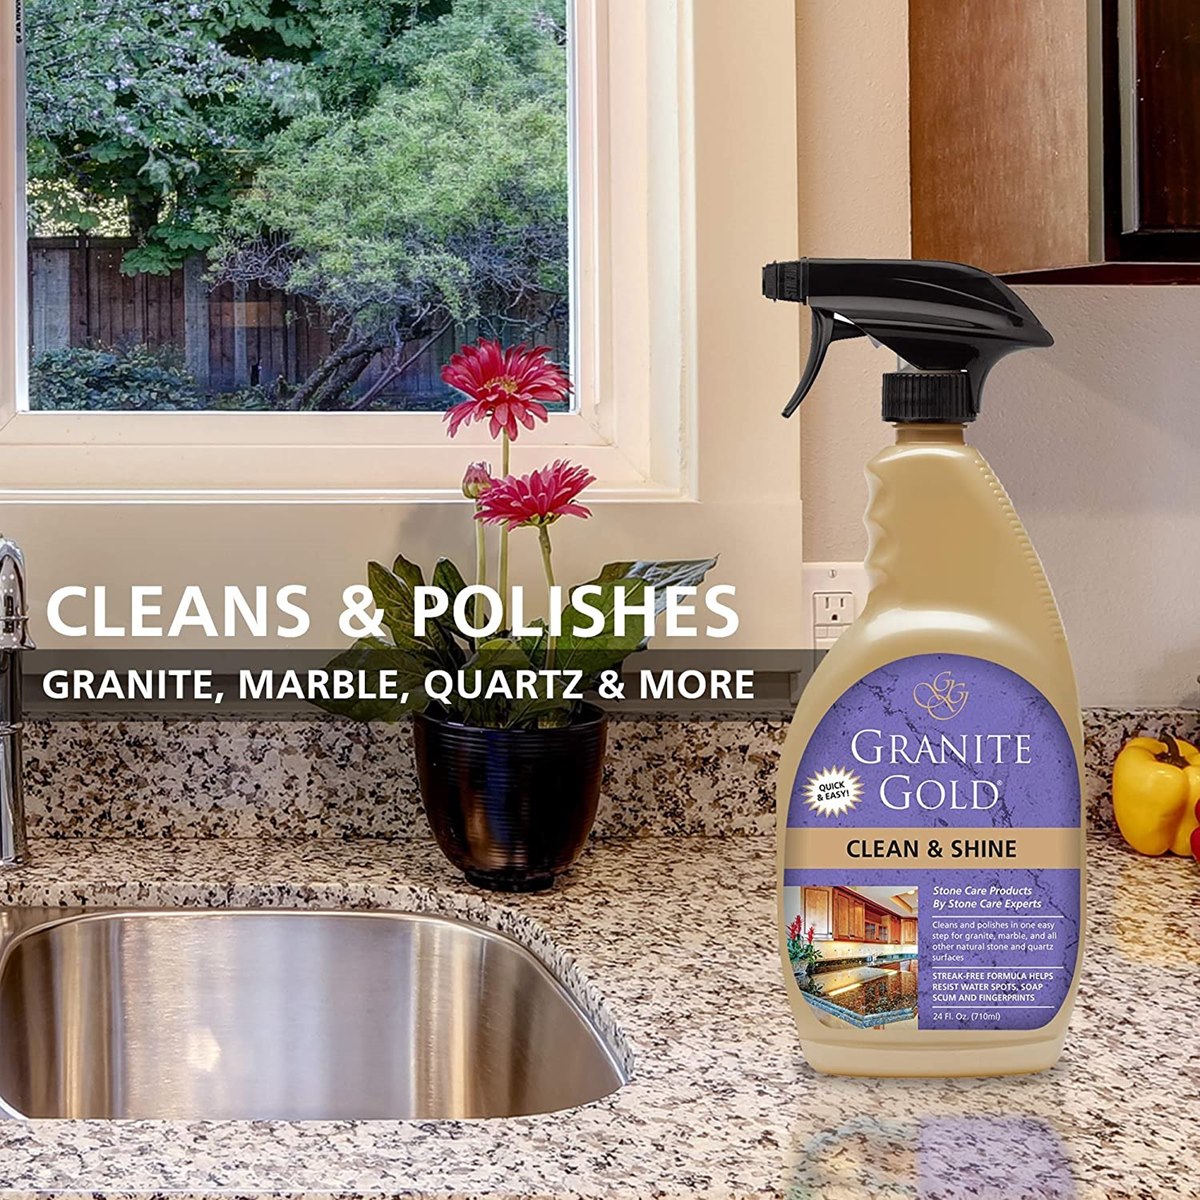 How to Clean and Polish Granite